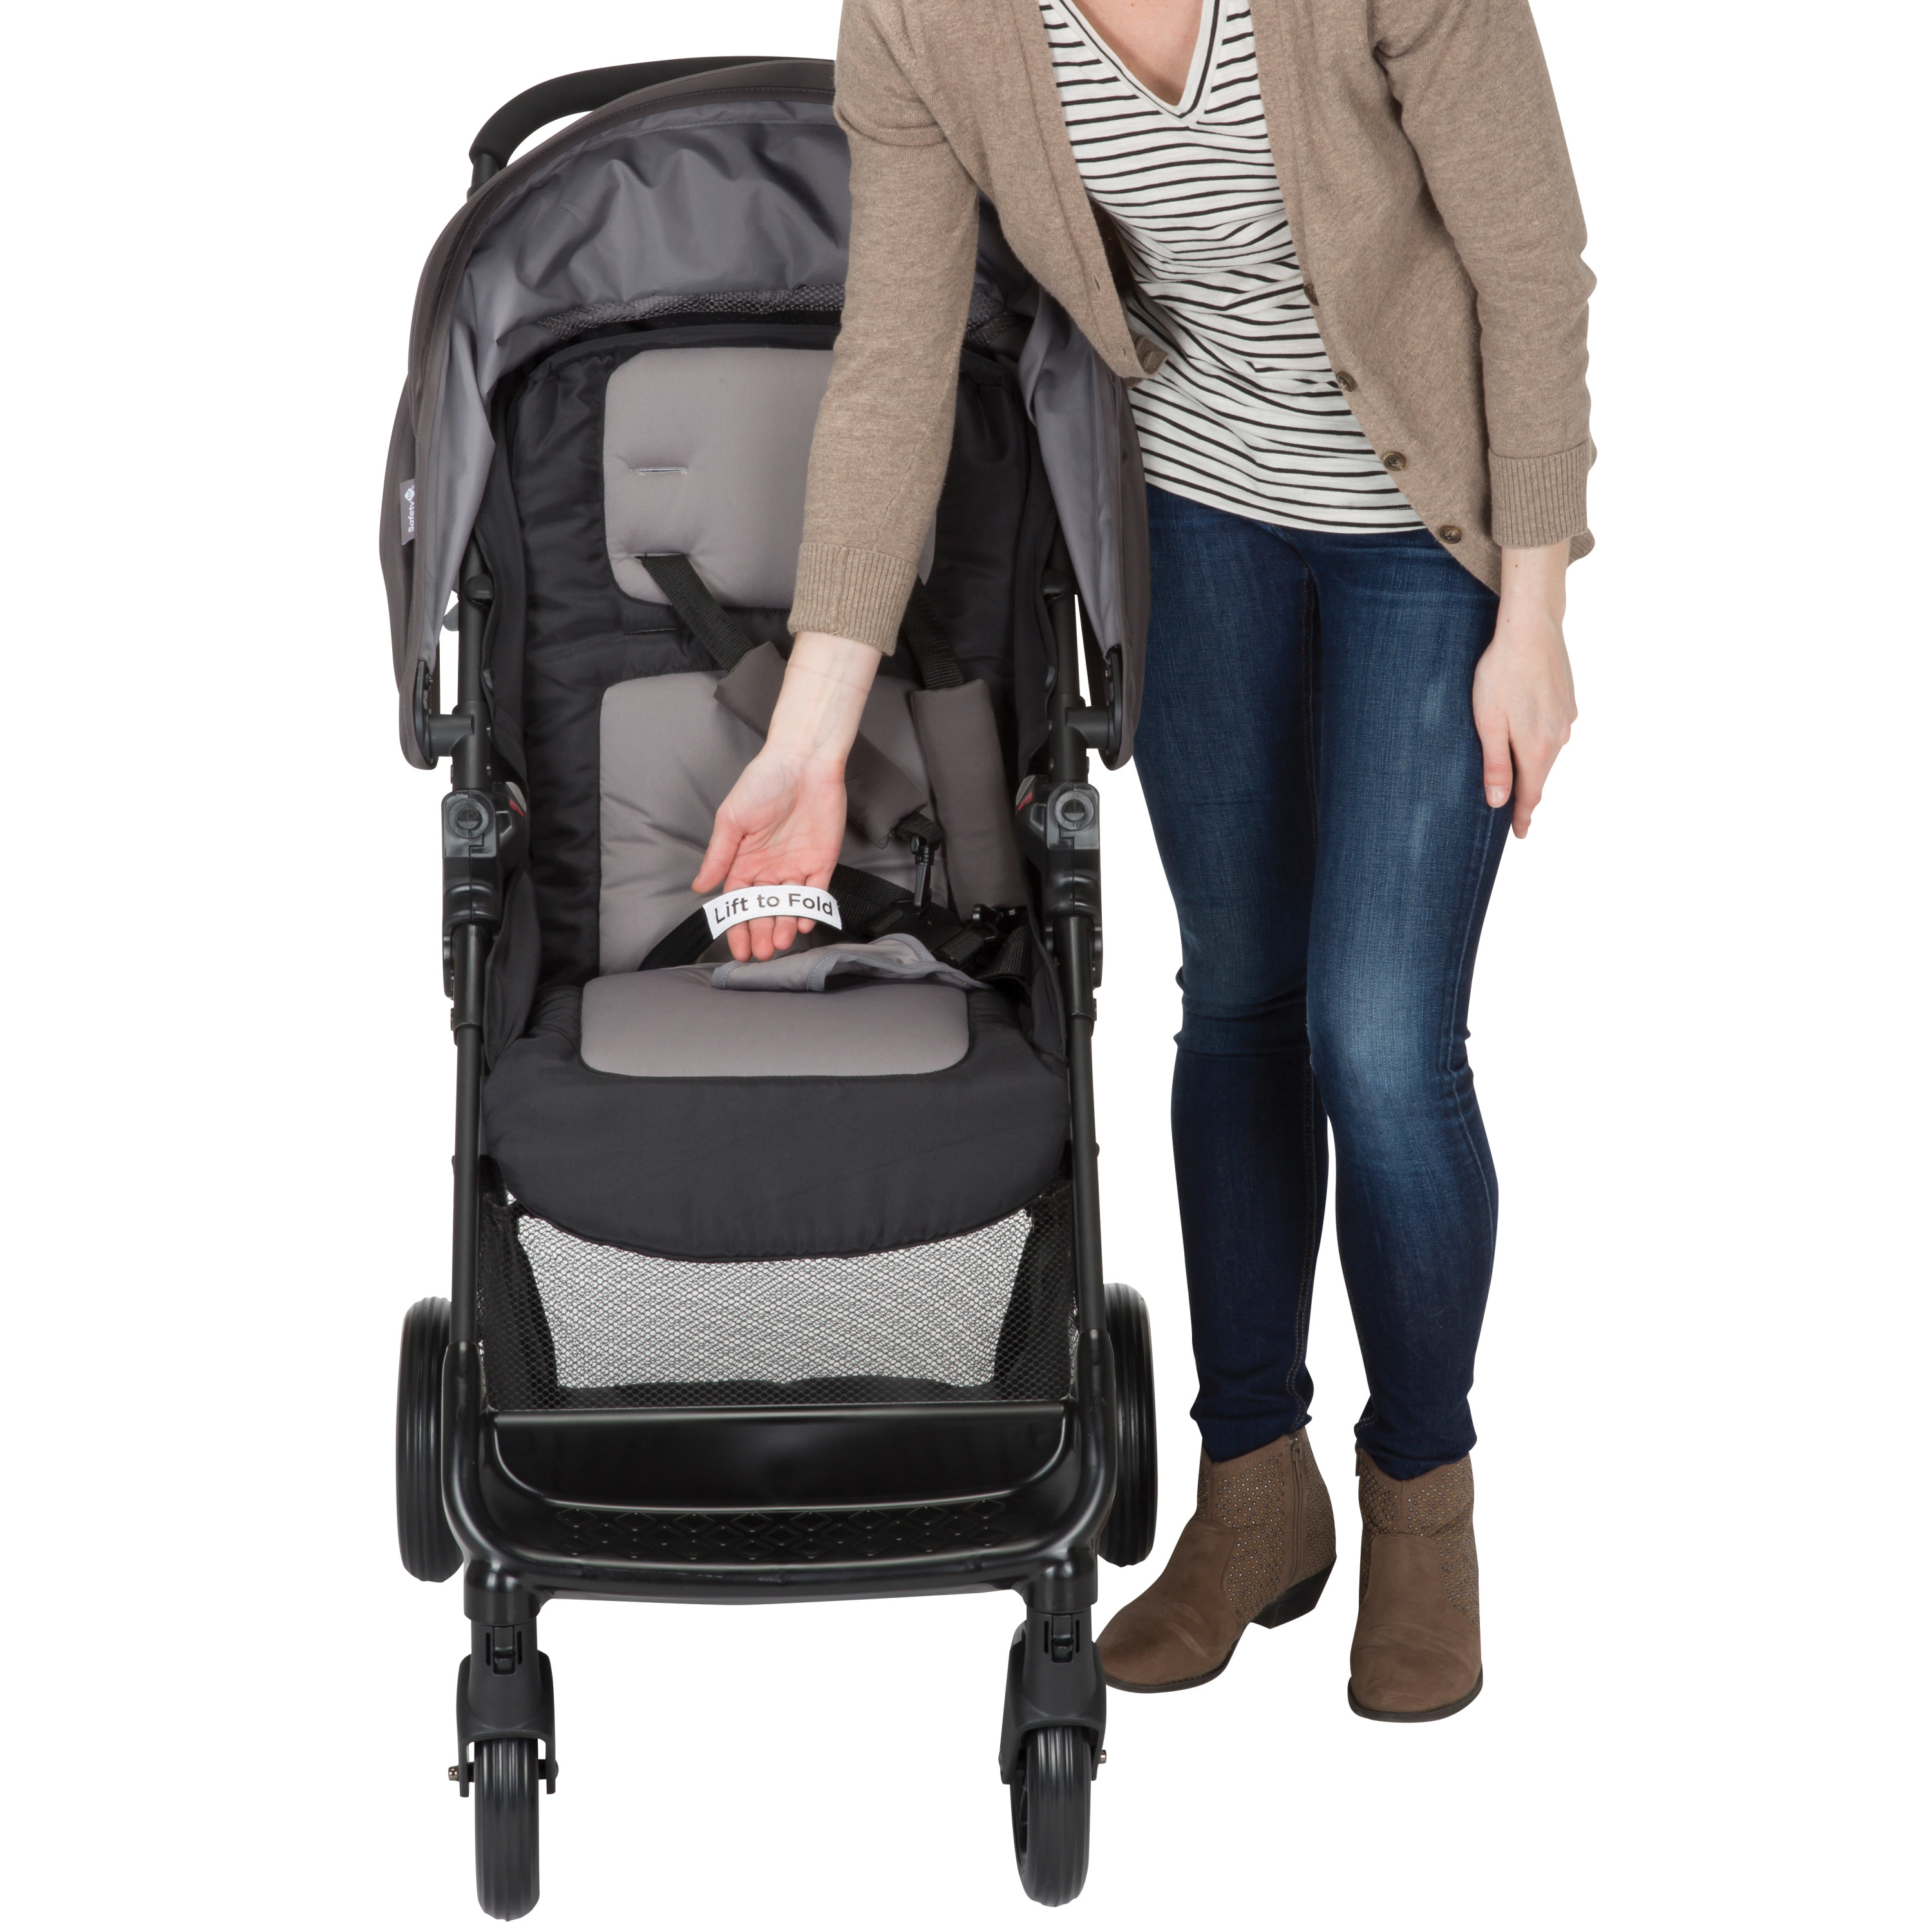 Safety 1ˢᵗ Smooth Ride Travel System Stroller and Infant Car Seat, Monument - image 3 of 28